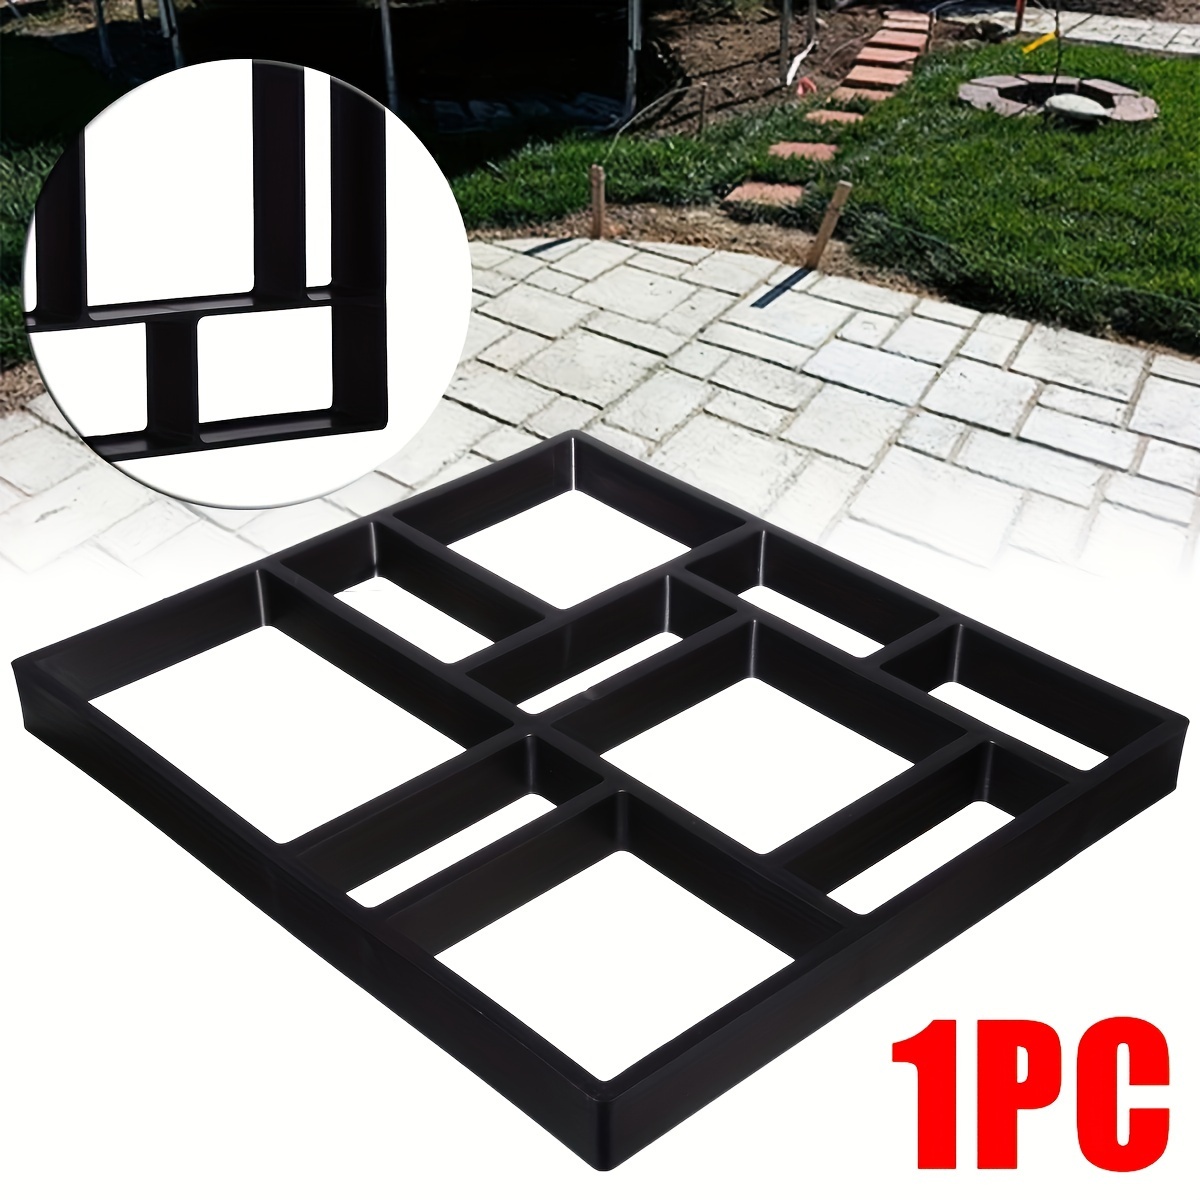 

Diy Pavement Mold, 10-grid Plastic Path Maker For Colored Concrete And Cement, Single Item Packaging, Reusable Molding Tool Without Electricity